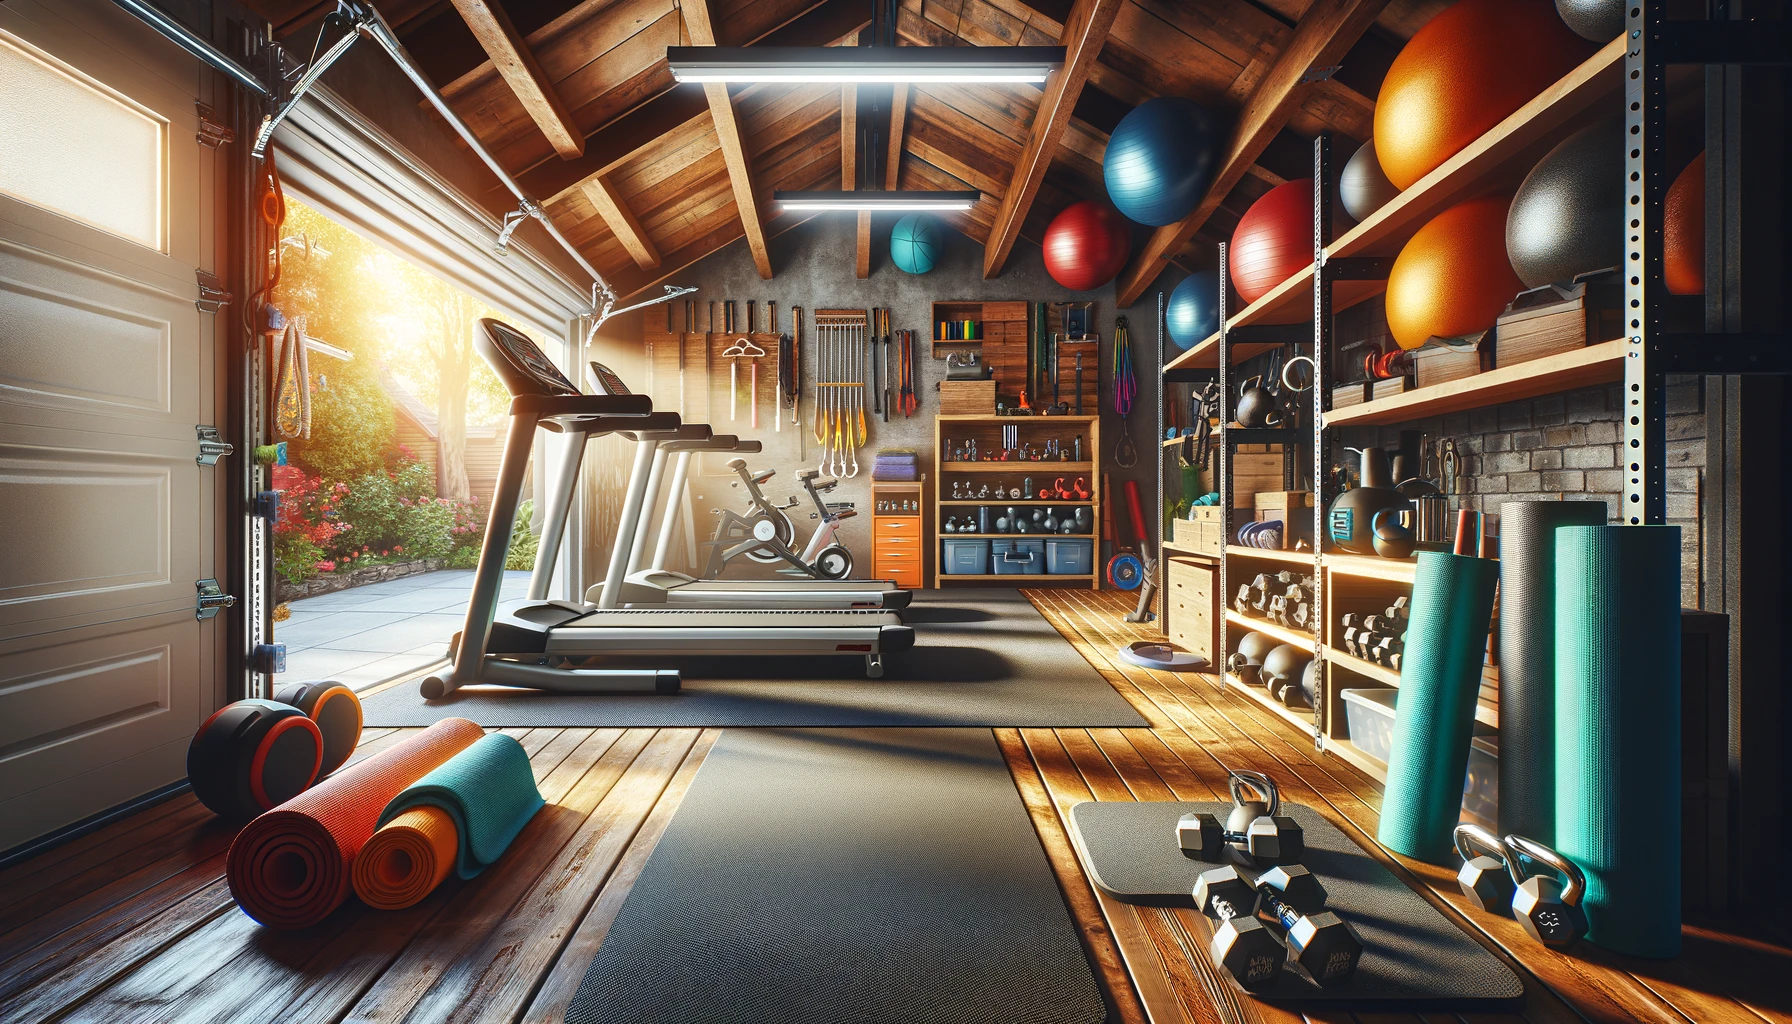 Well-equipped home garage gym with sunlight streaming in.